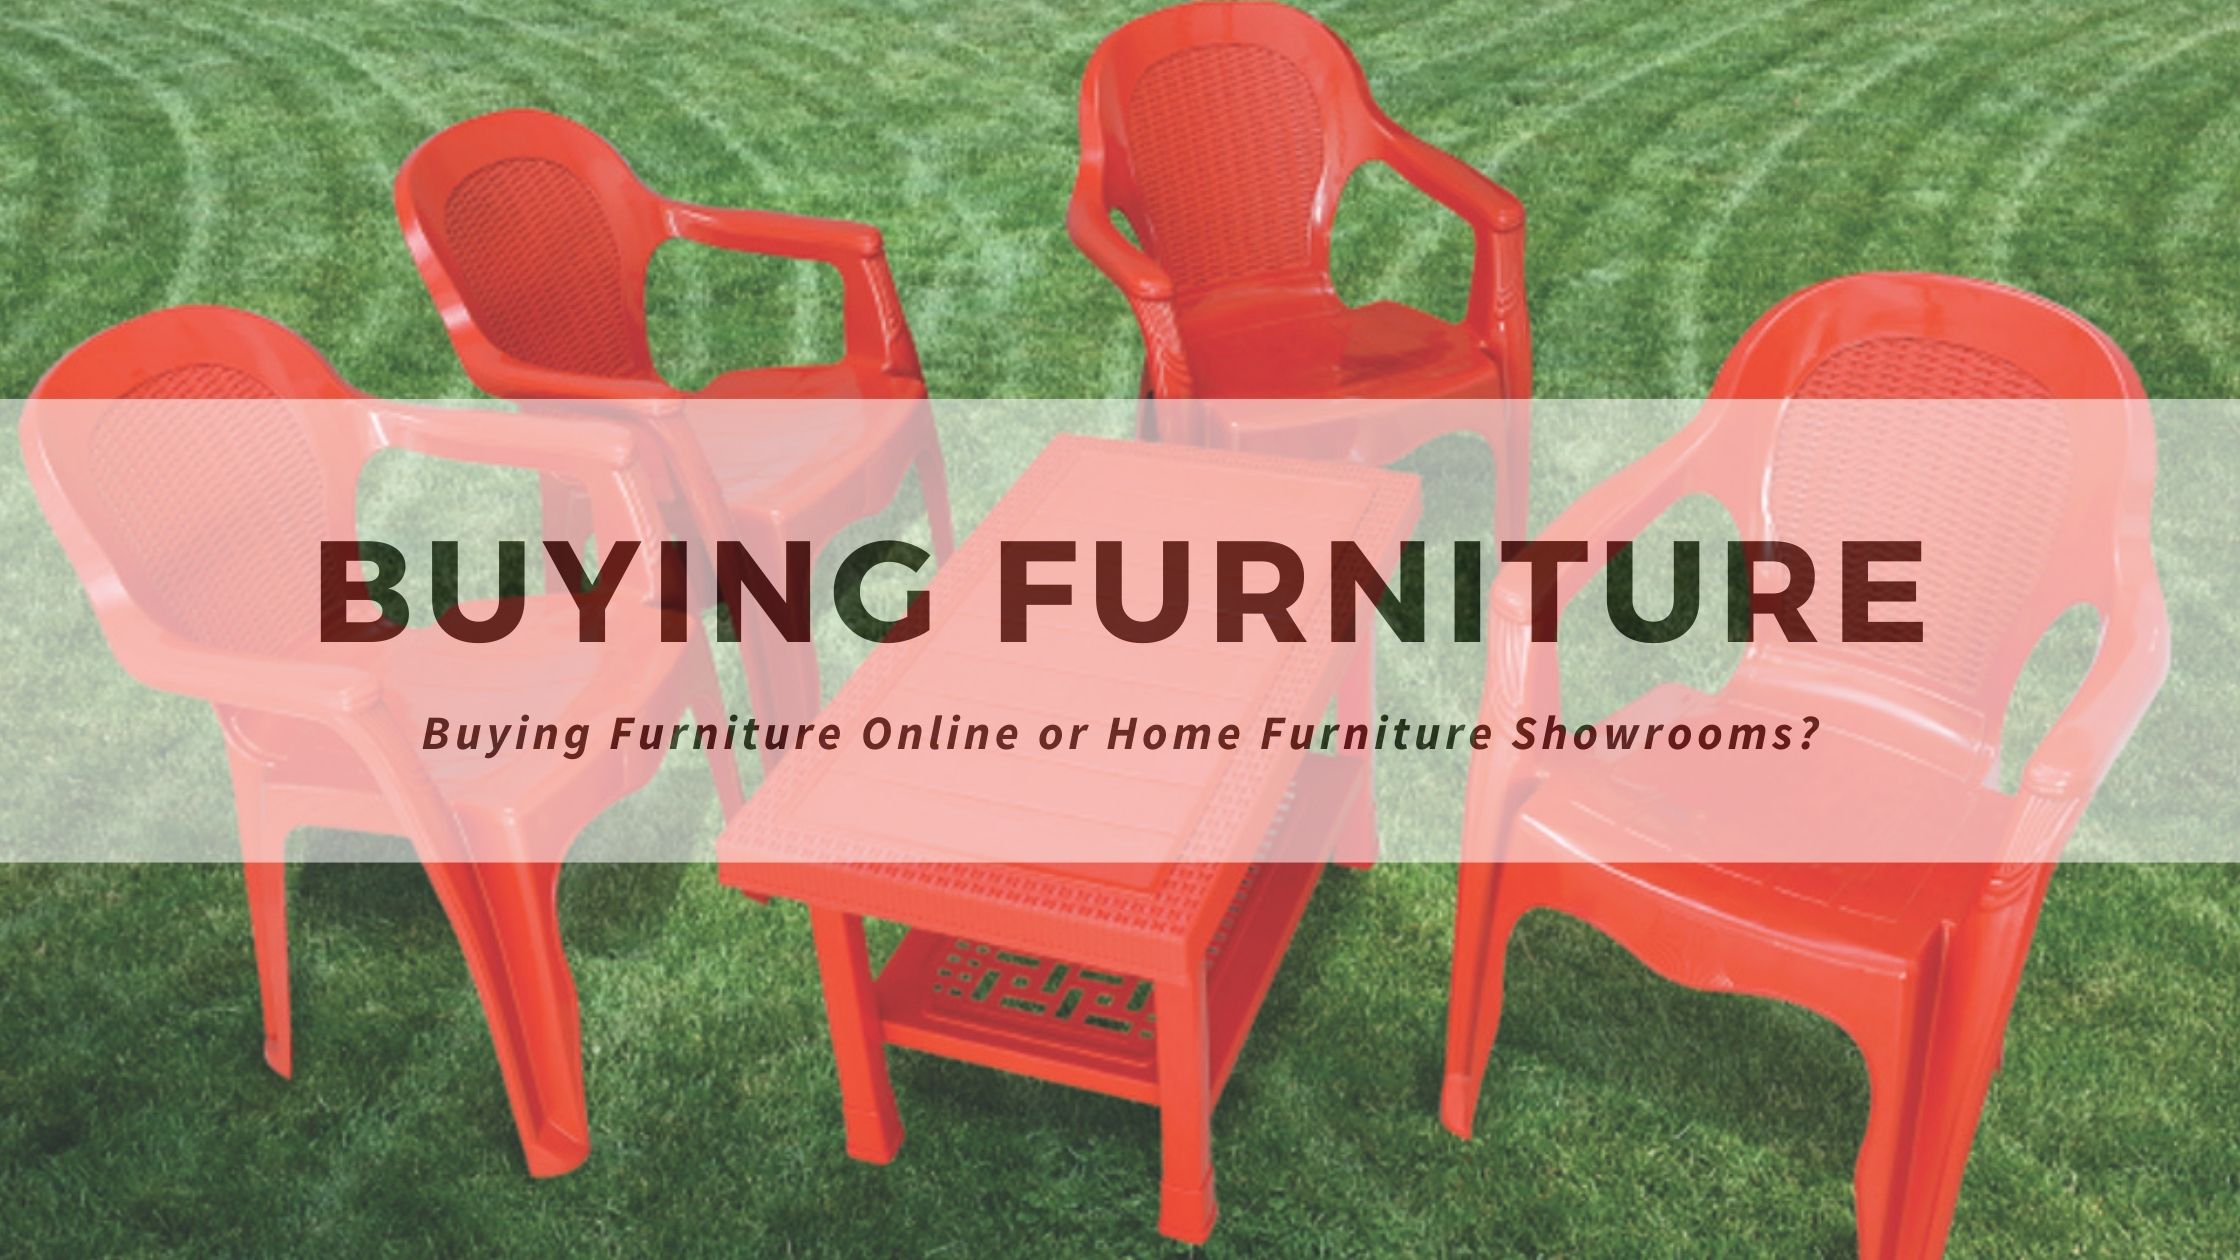 Buying Furniture Online or Home Furniture Showrooms?